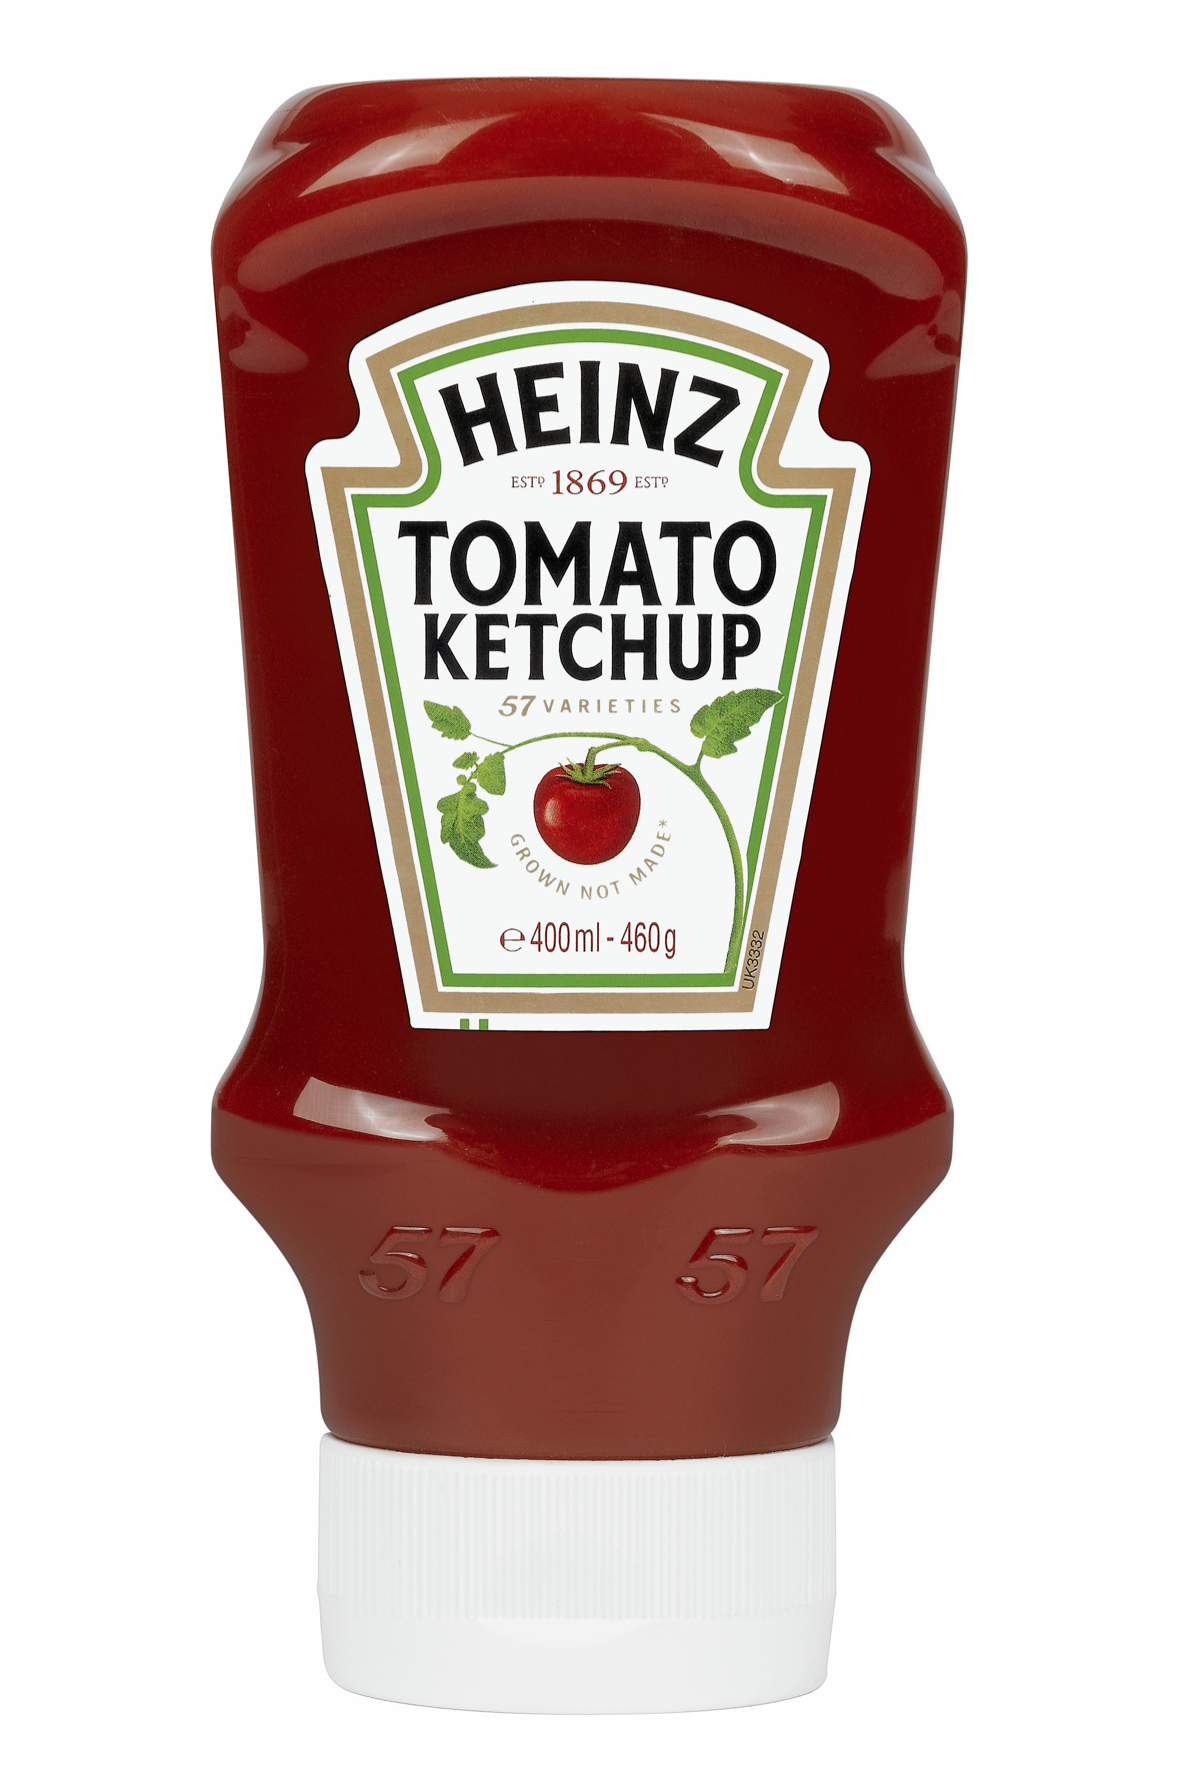 Photograph of 1 x 460g Heinz Tomato Ketchup product